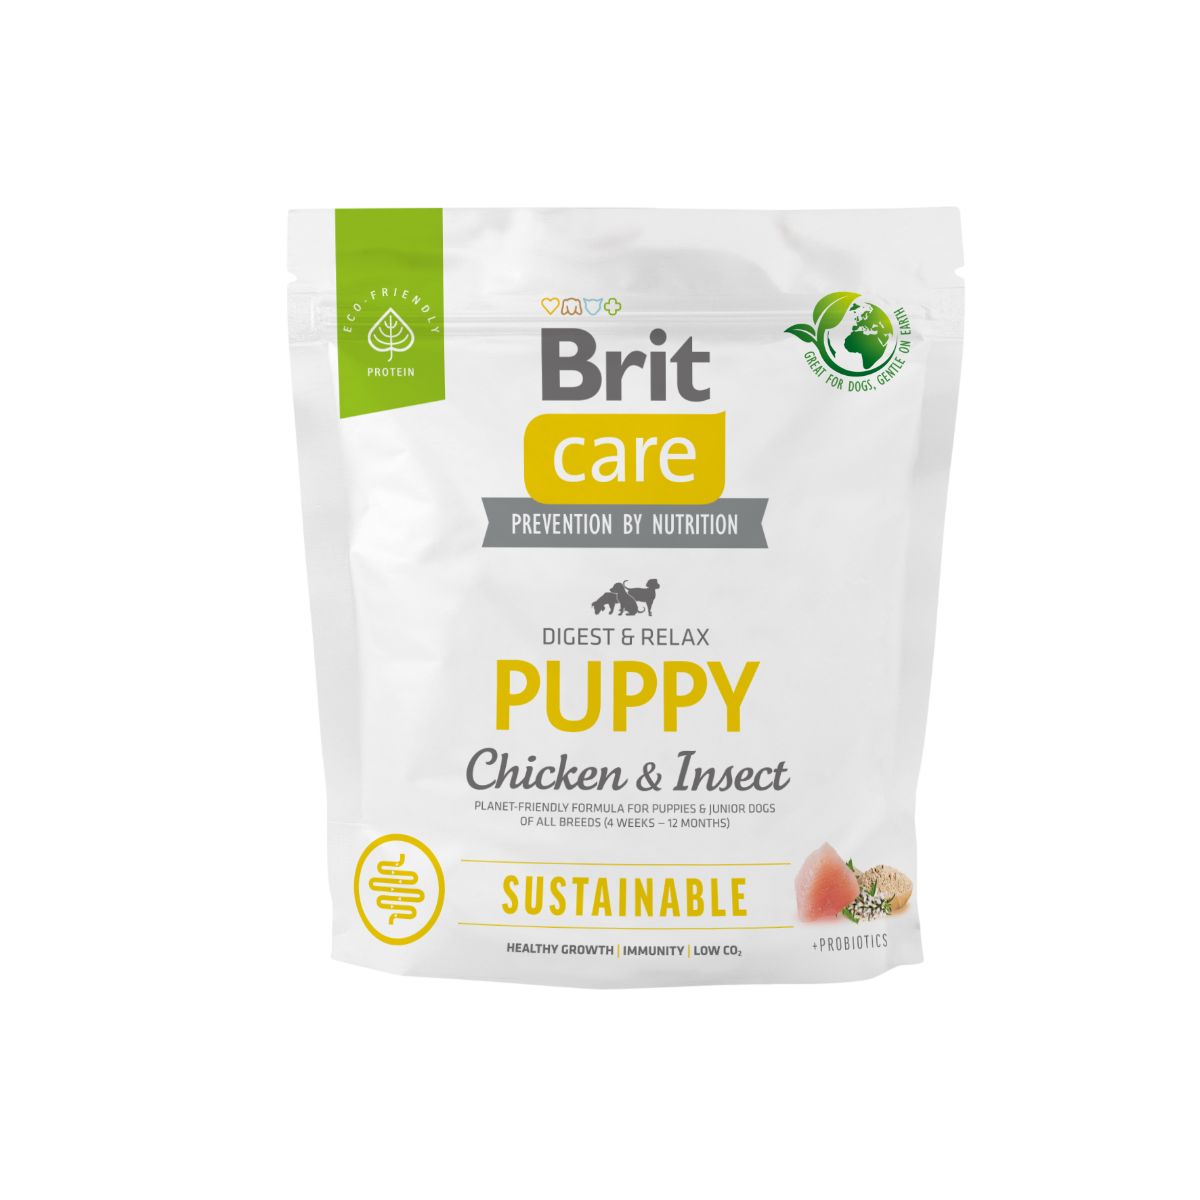 Brit Care – Sustainable – Puppy-4